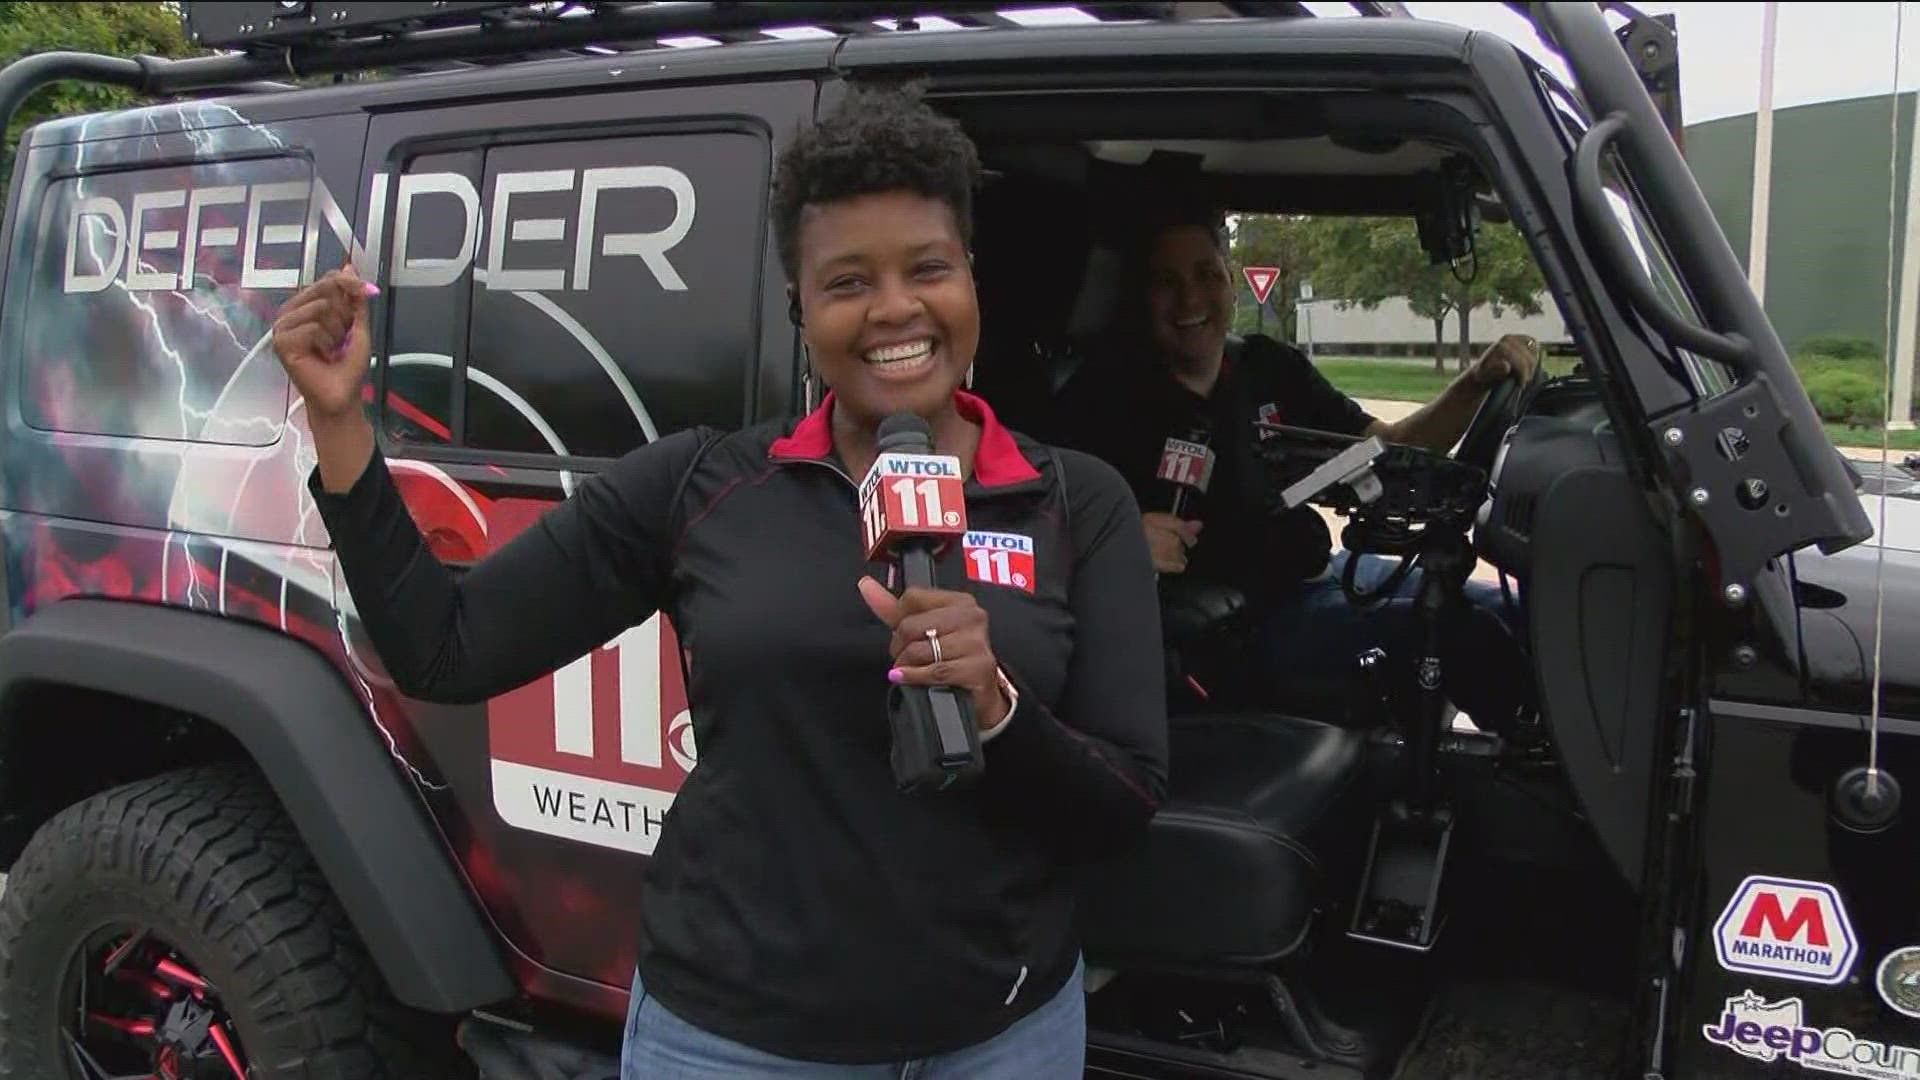 Our very own Tim Miller and Tiffany Tarpley are downtown at Toledo Jeep Fest to join in on all of the fun!